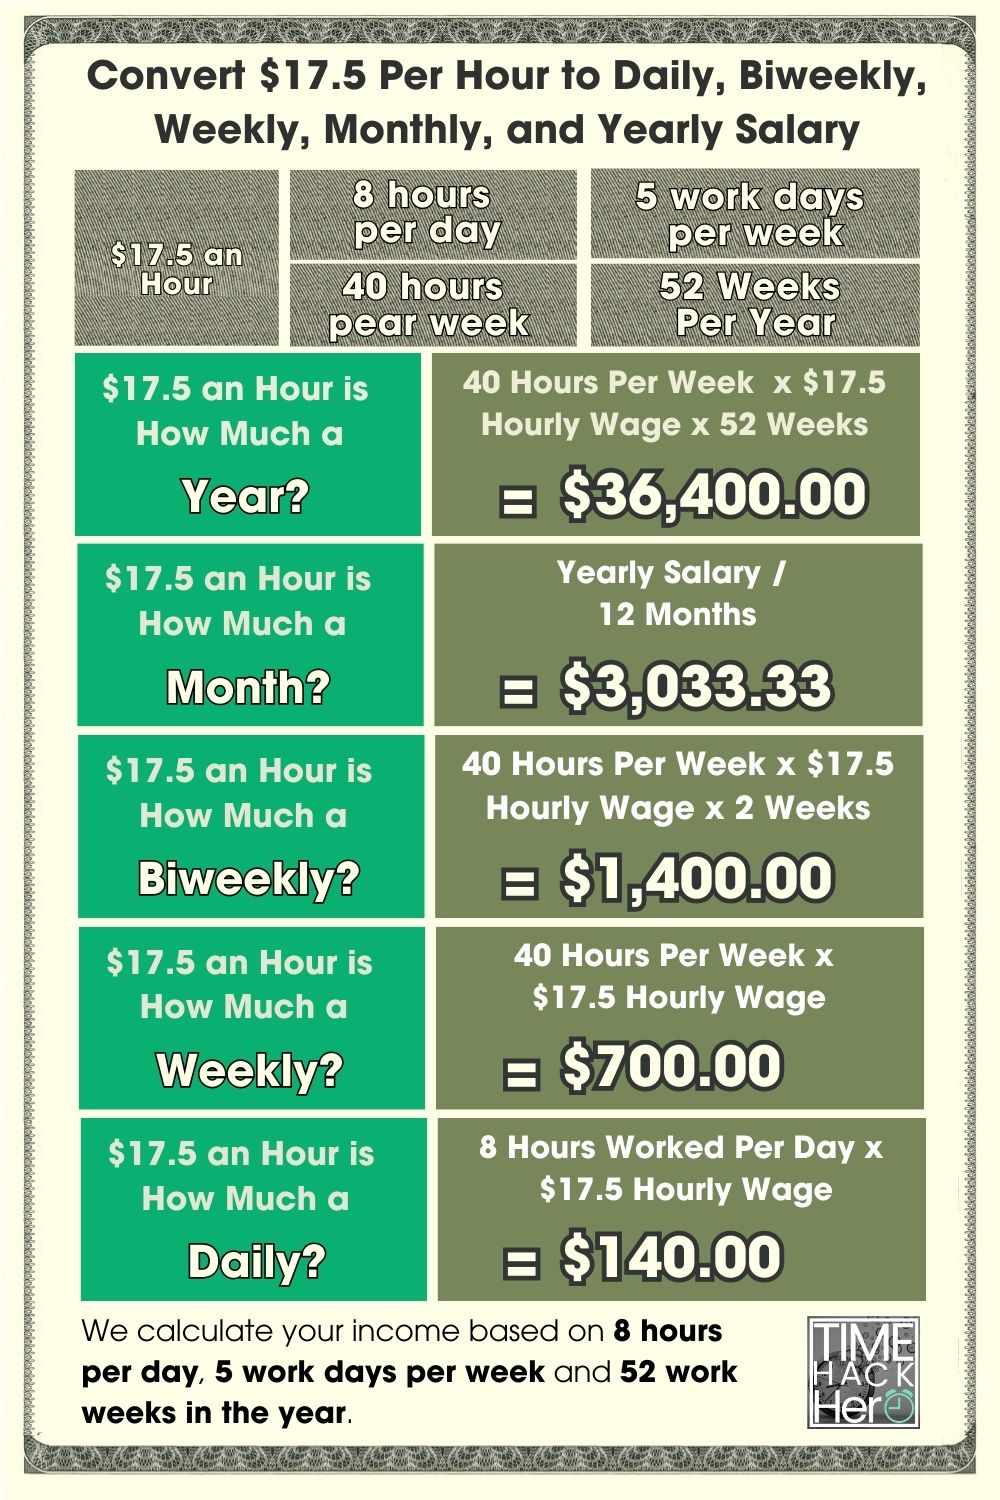 Convert $17.5 Per Hour to Daily, Biweekly, Weekly, Monthly, and Yearly Salary